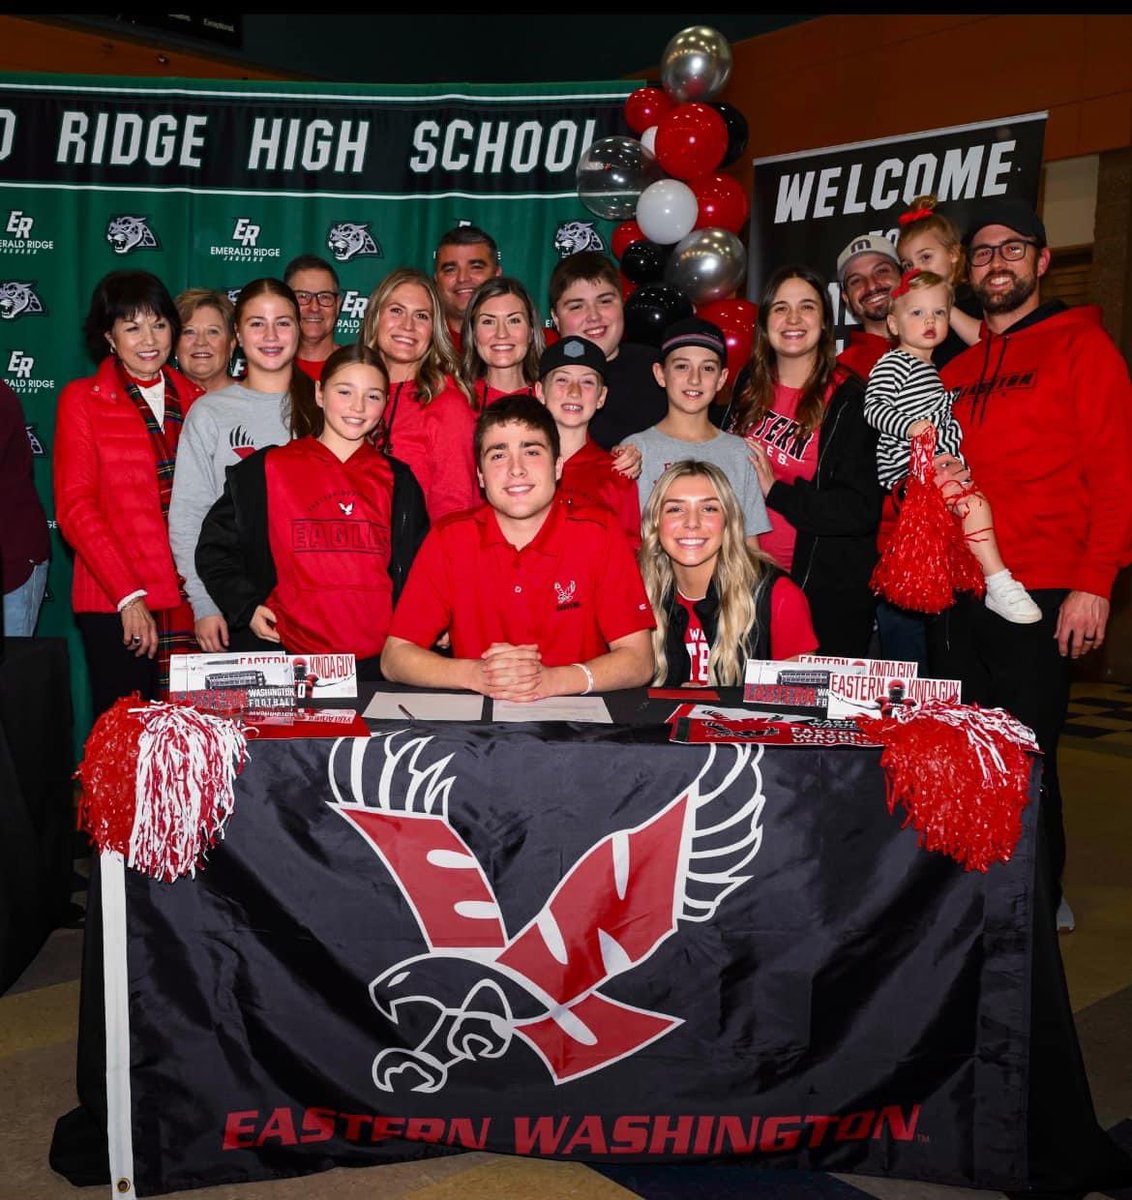 I hope Cheney is ready for us!!! Eag fans everywhere!! Let’s go! ❤️🦅

#signingday2023

@Jake_Schakel14 @EWUFootball